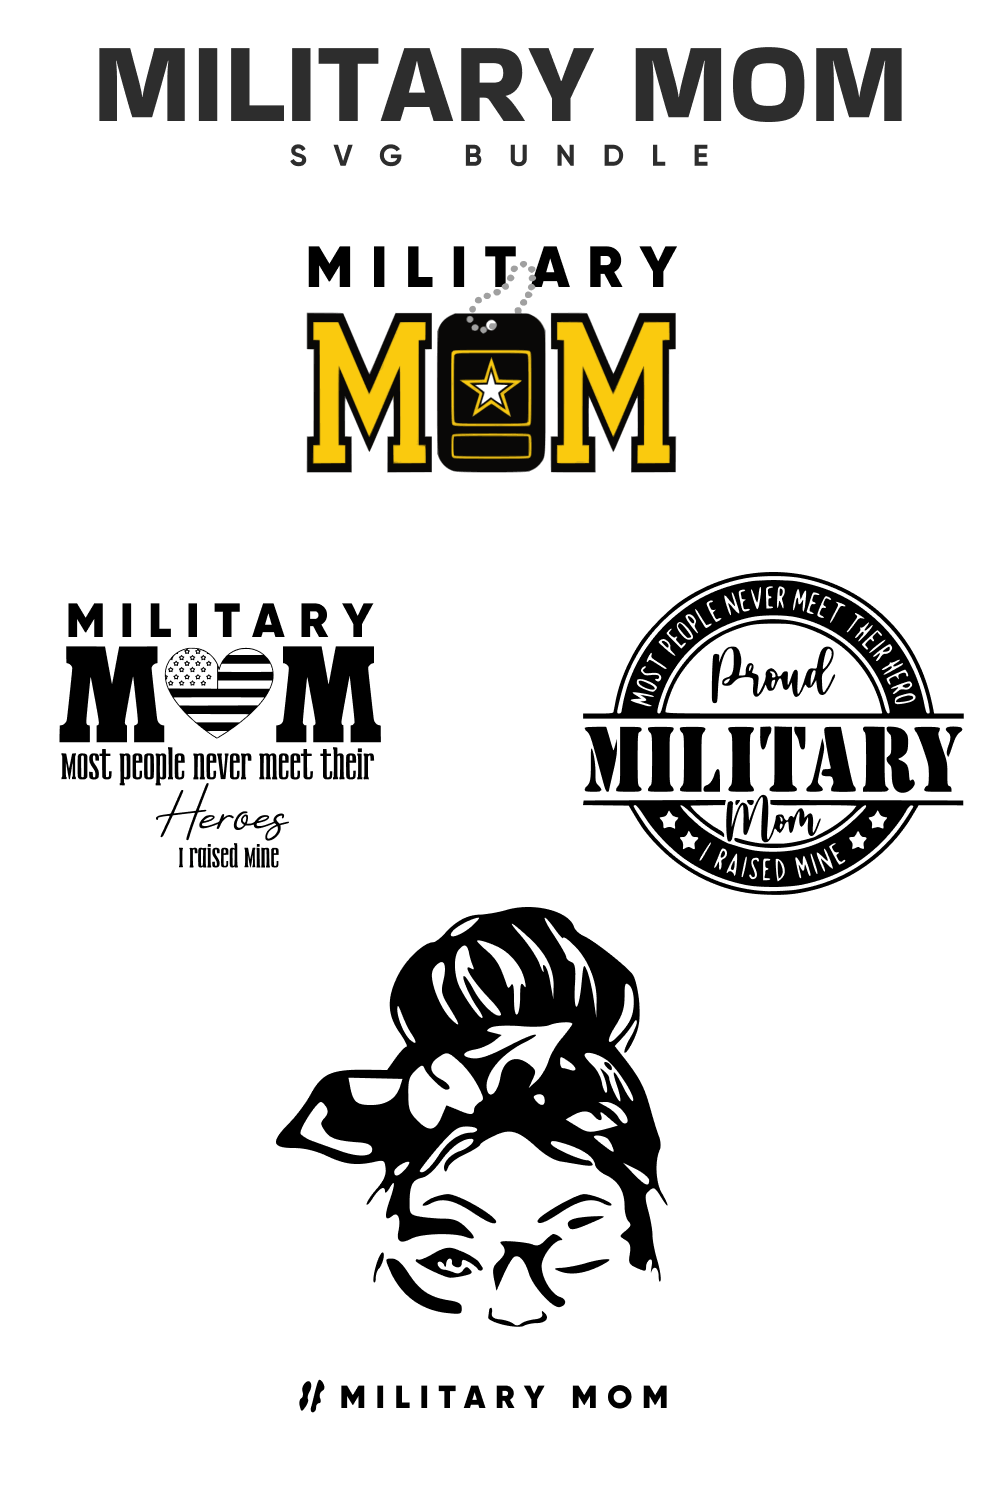 A large header and four black and white and yellow logos for the military mom.